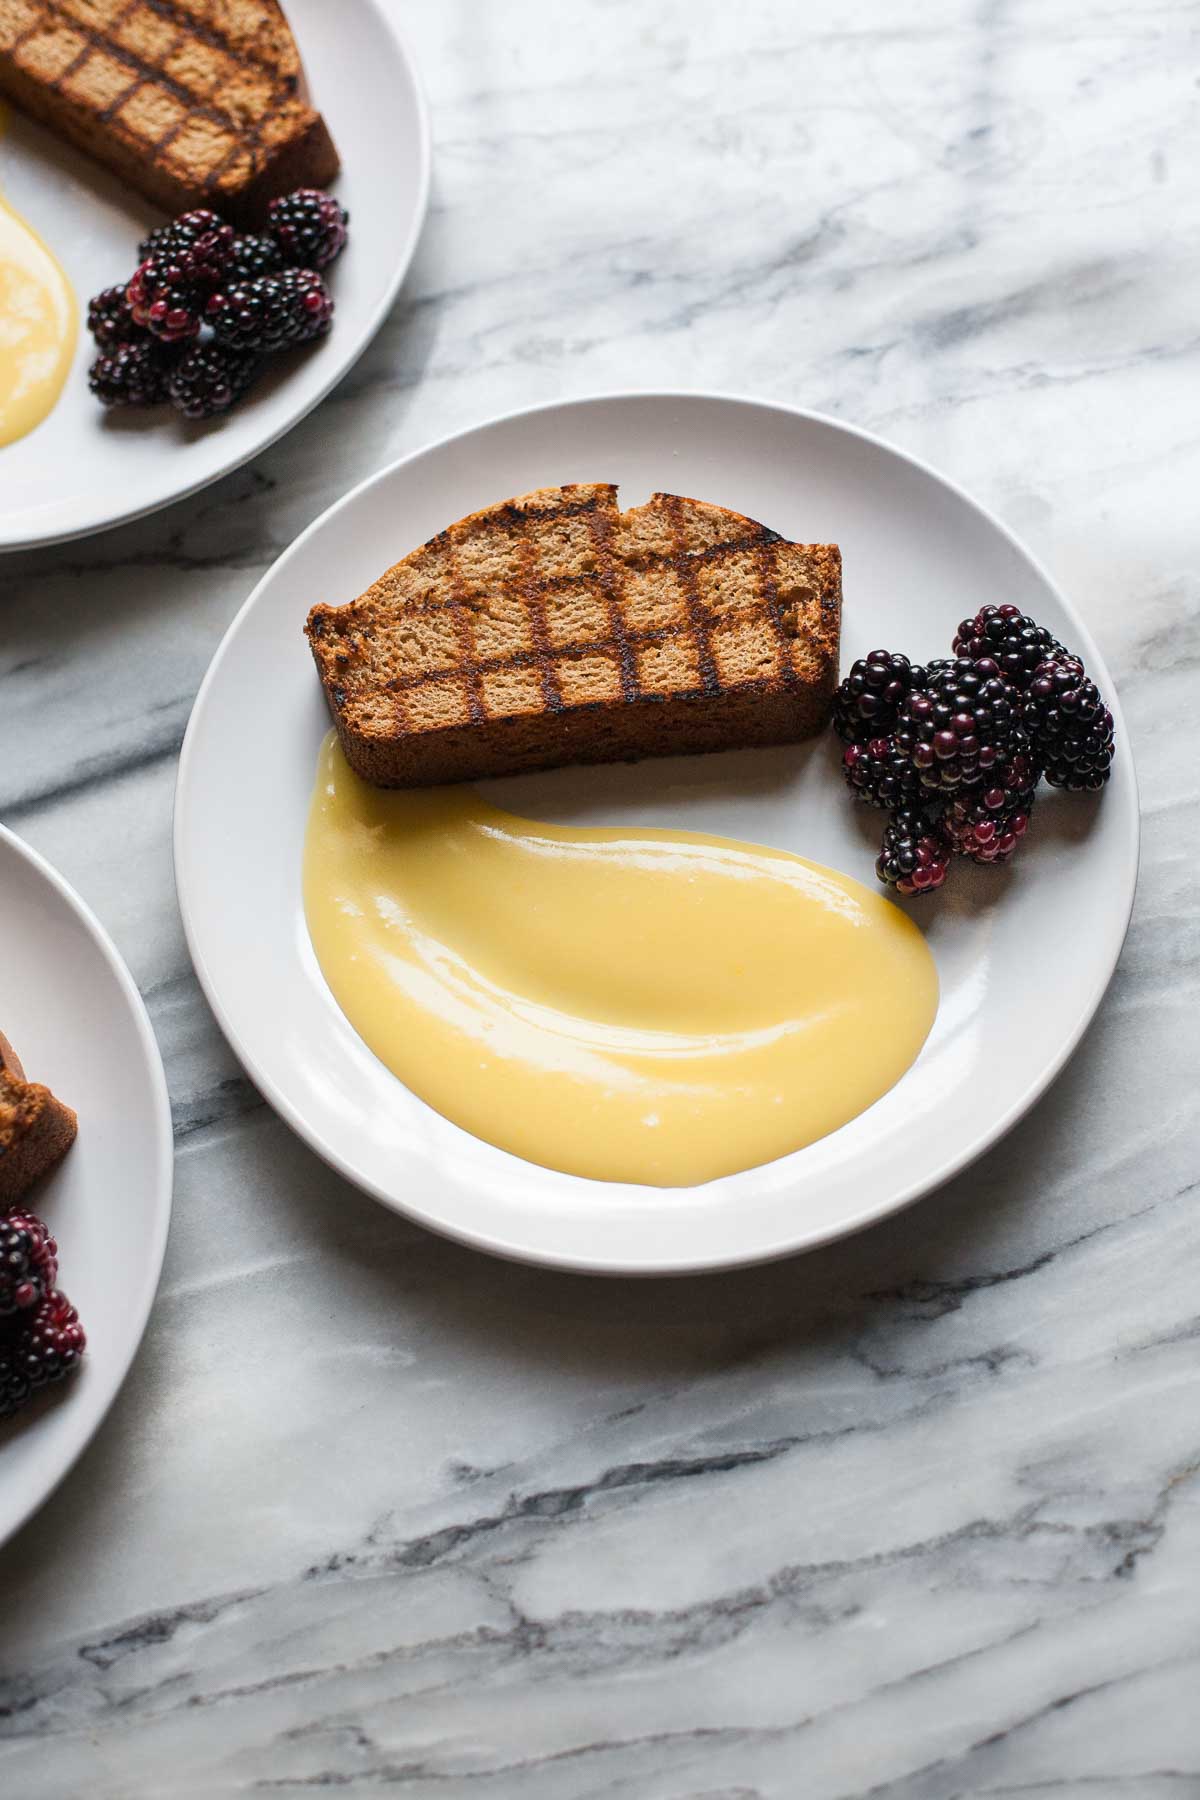 Grilled Pound Cake with Lemon Curd and Berries